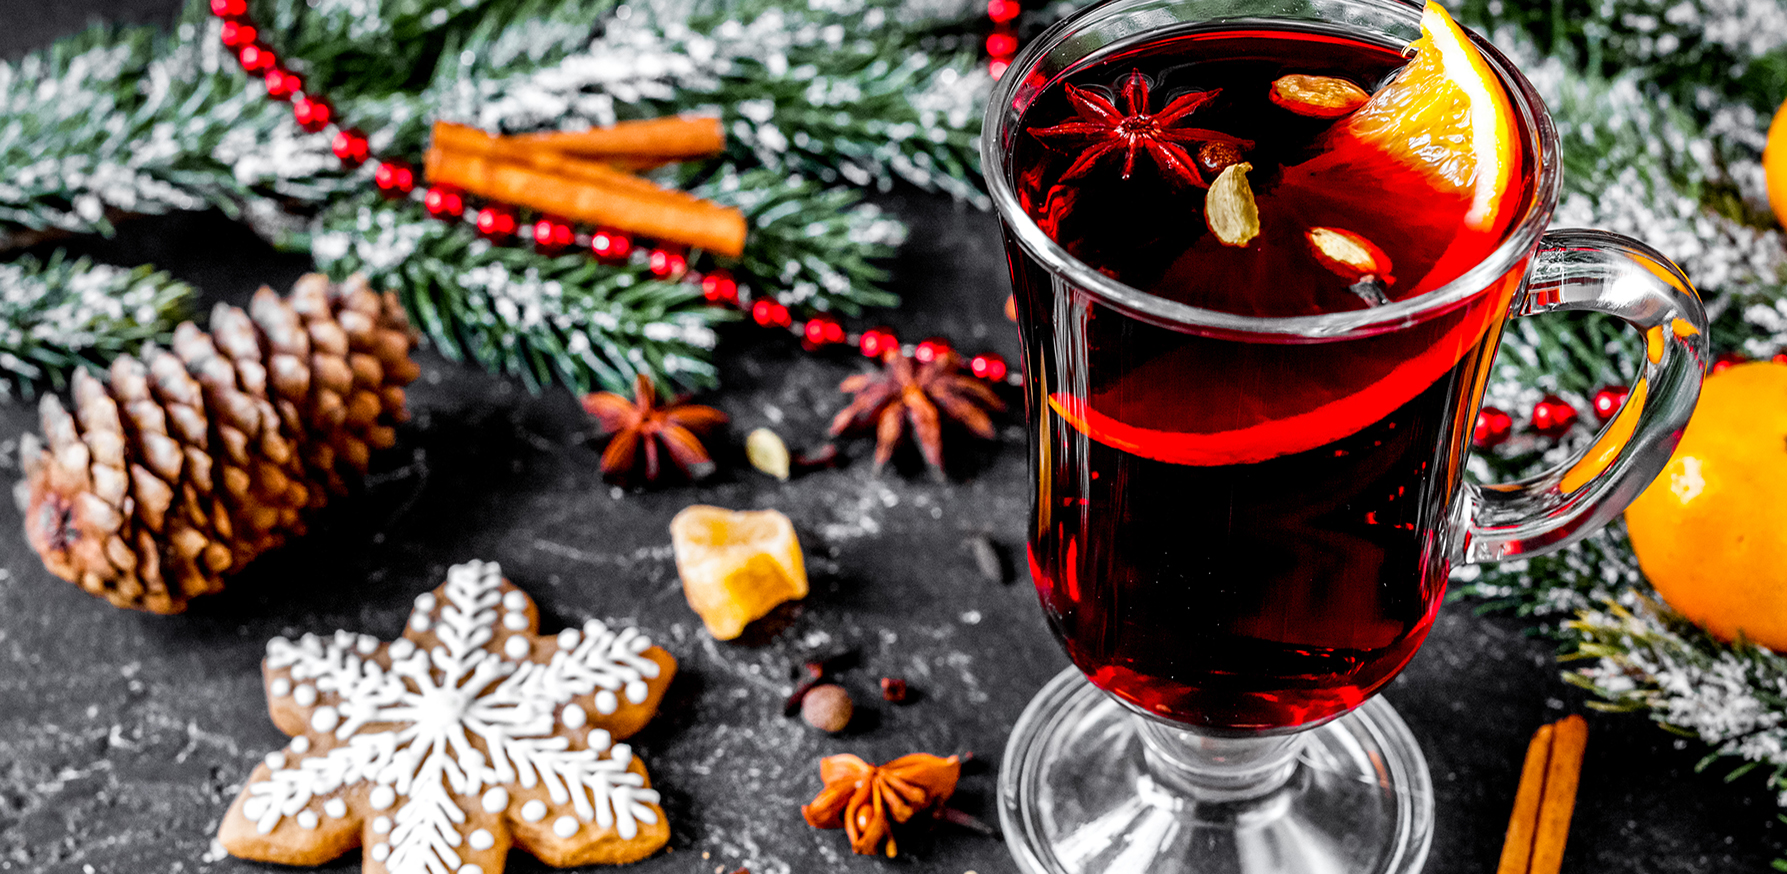 most-glamorous-christmas-markets-across-europe-holiday-decor-and-drinks